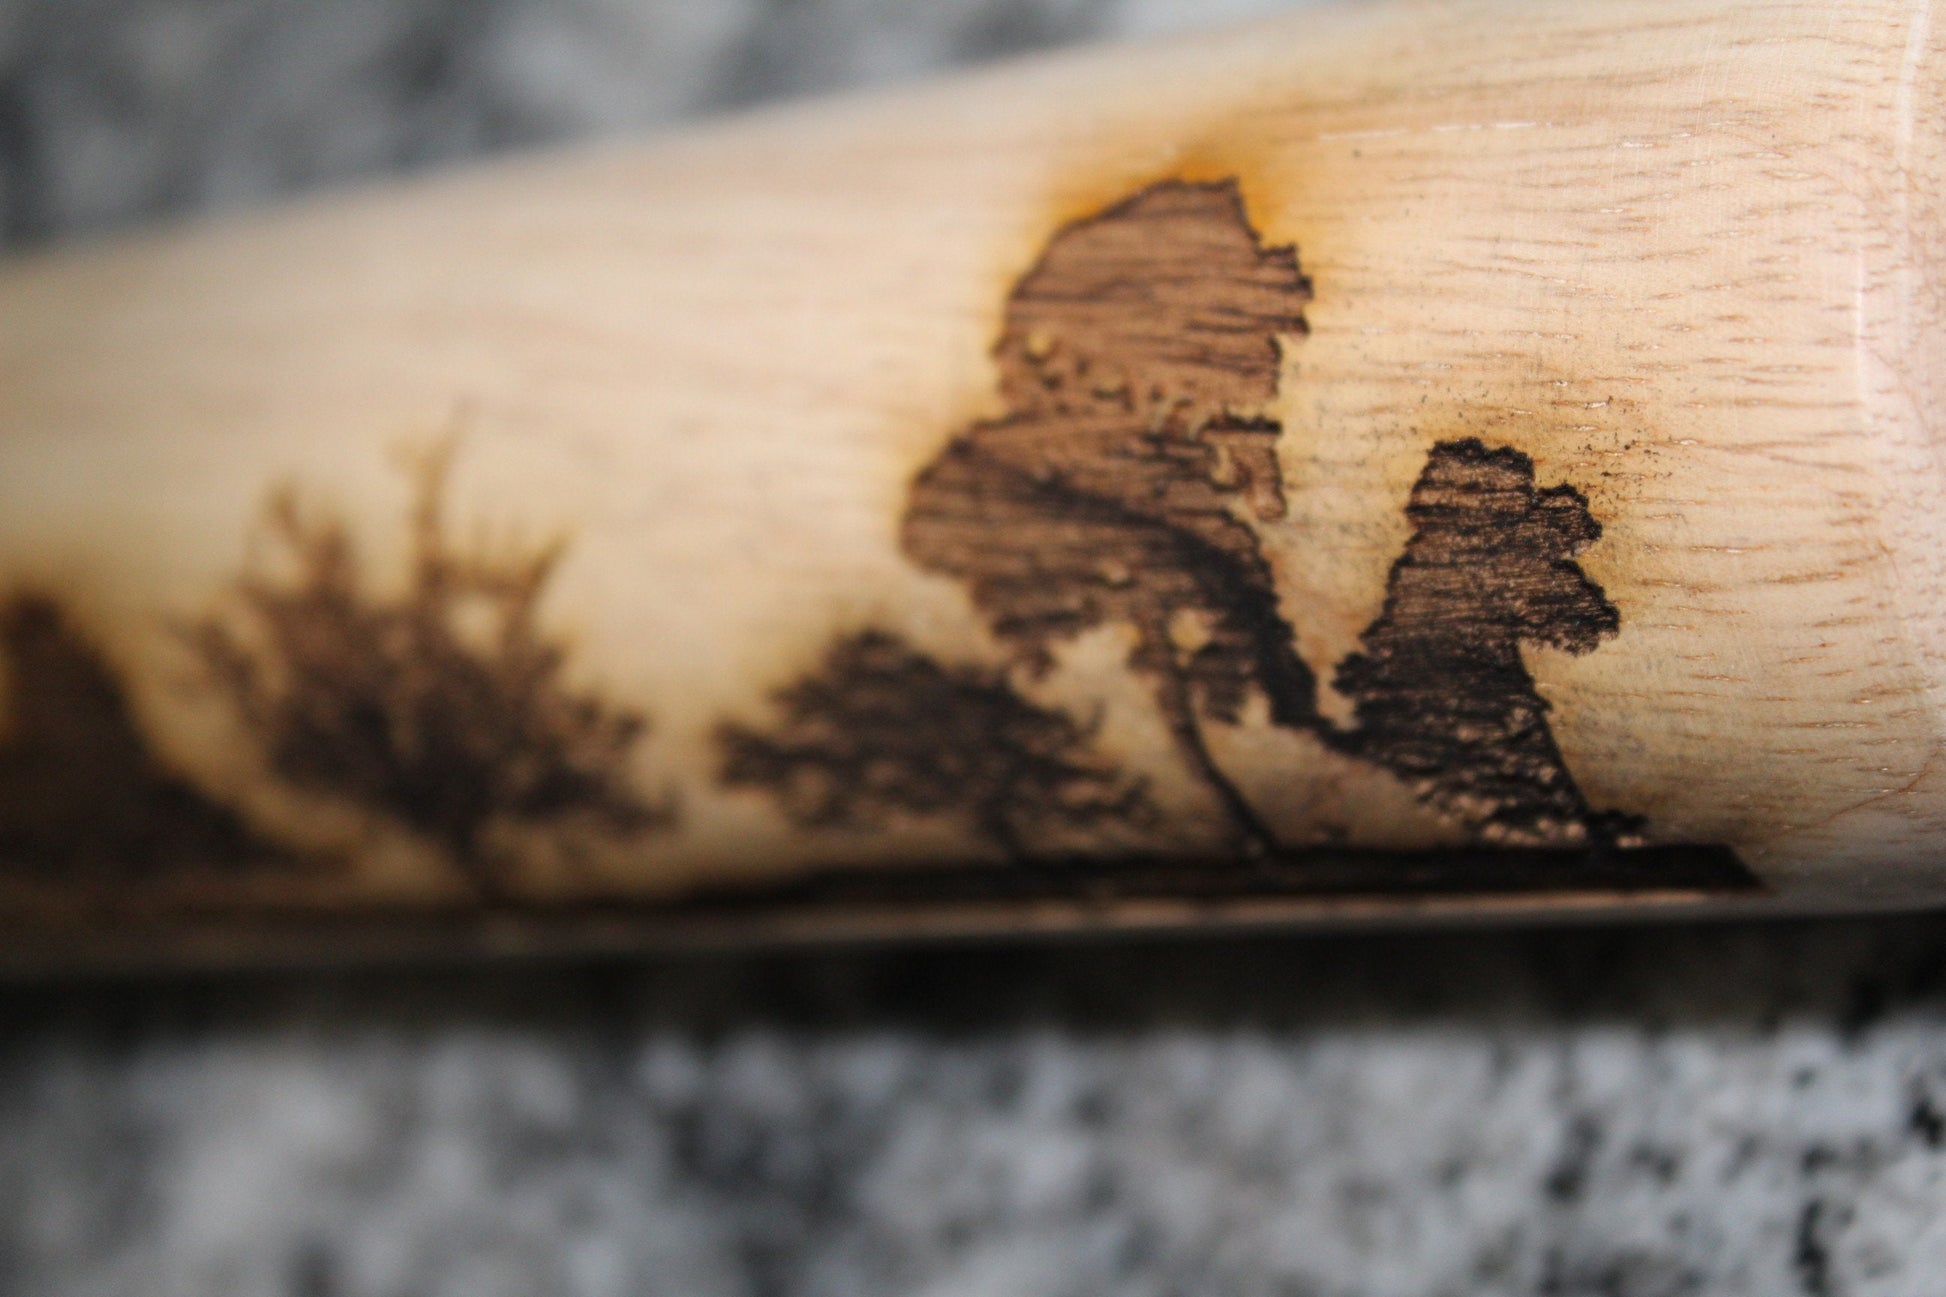 Tree Oak Maple Forest Rolling Pin Texture Embossed Engraved Wooden Cookie Stamp Laser Pottery Clay Stamp Embossing Roller Art